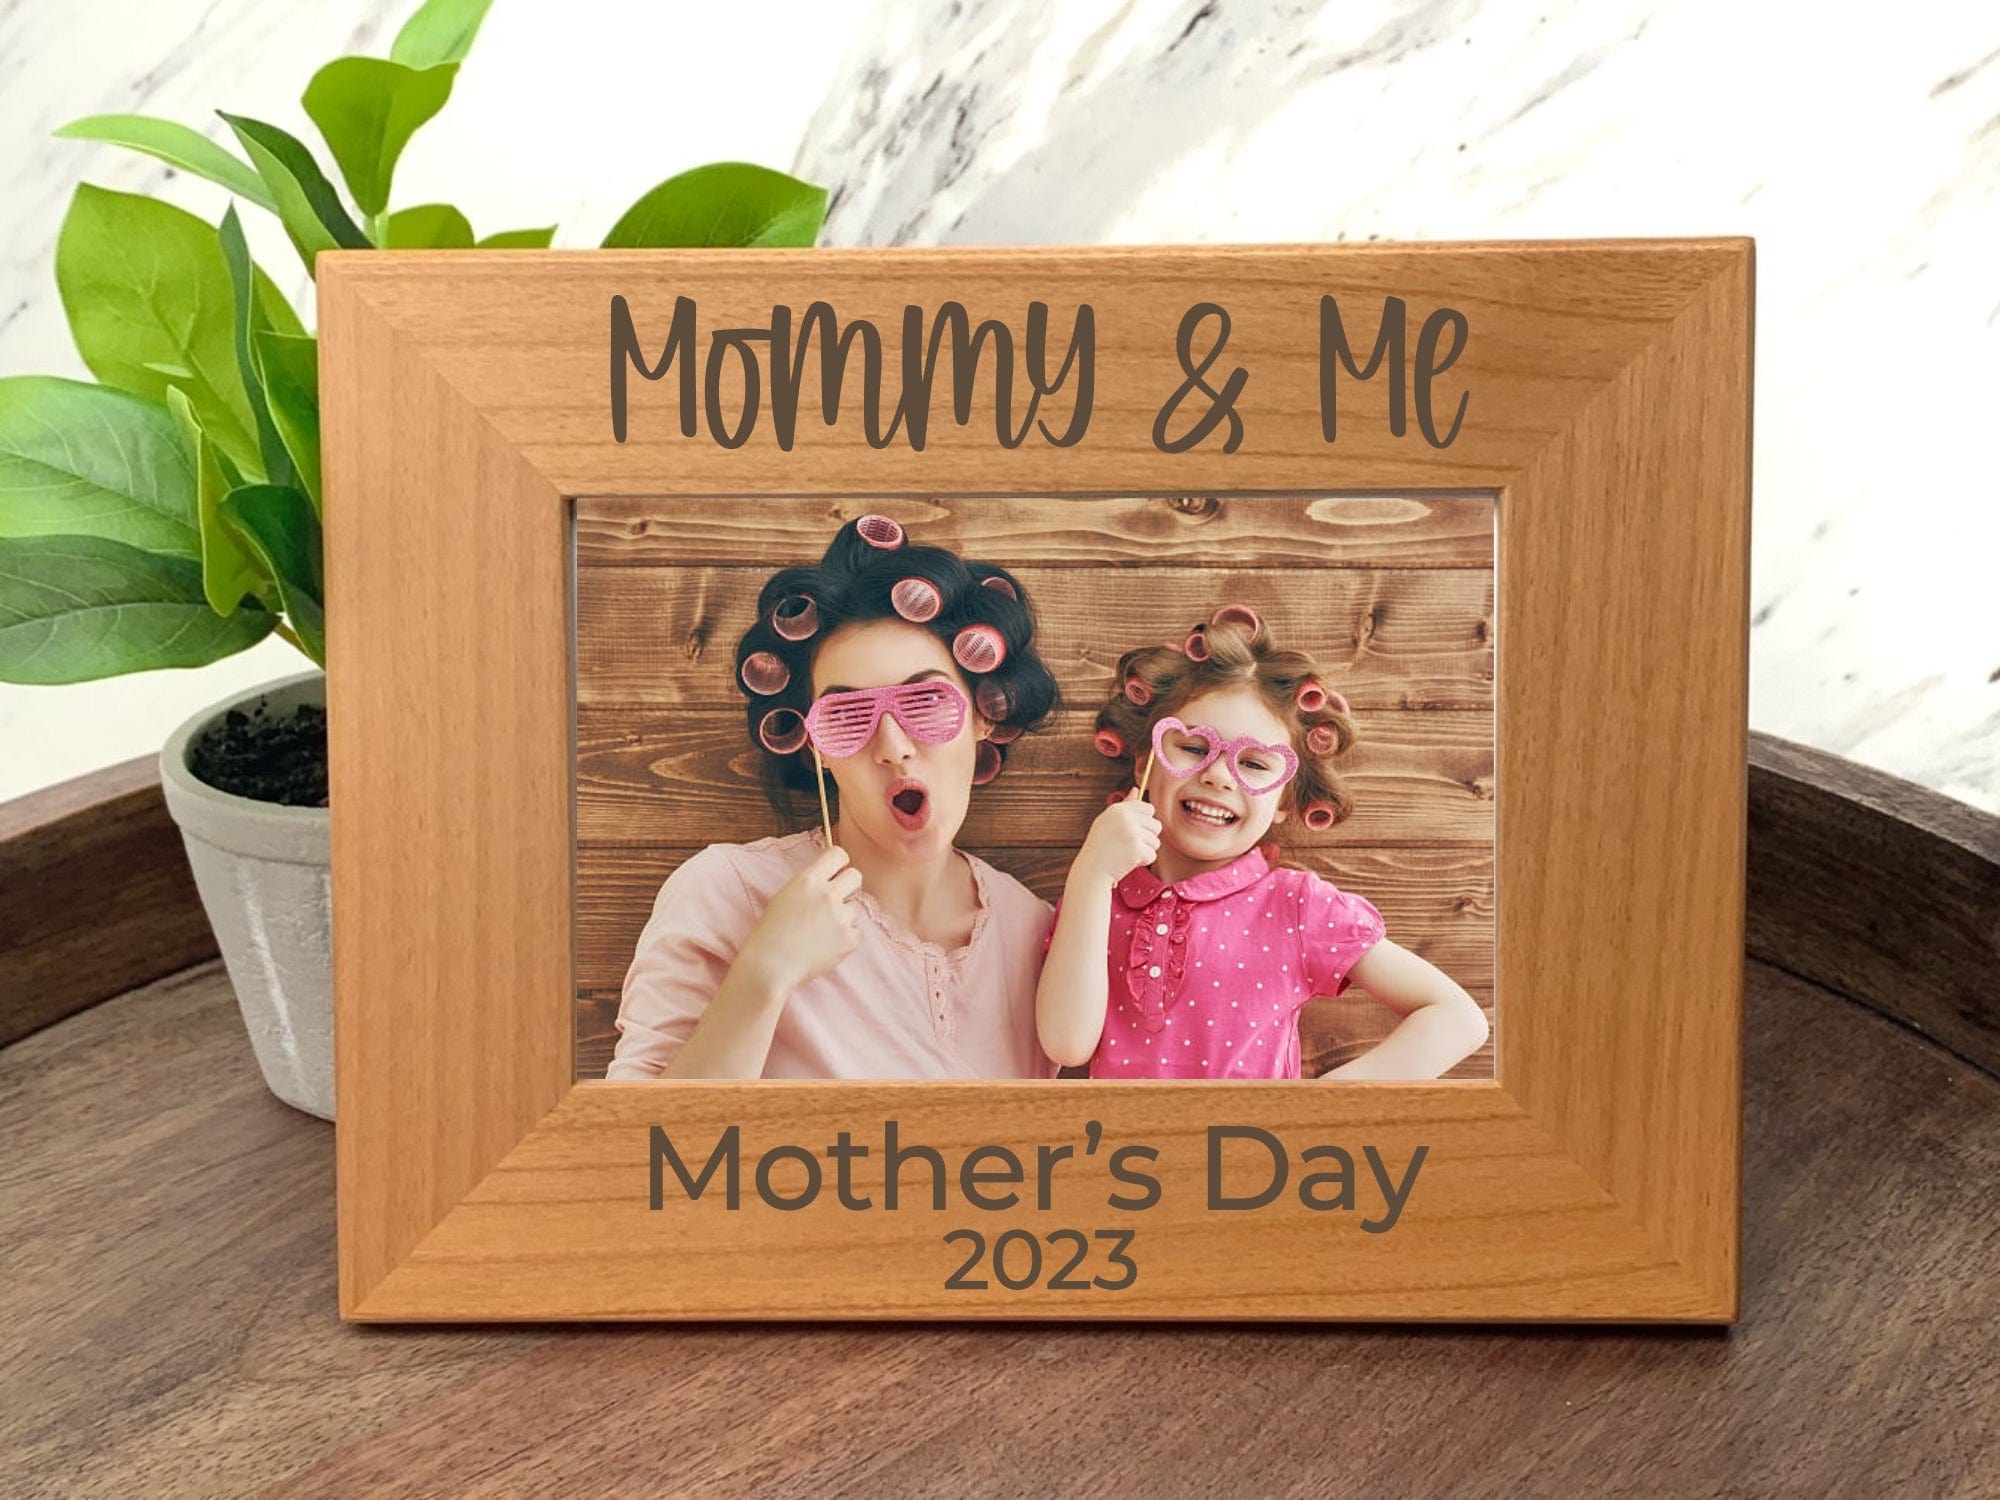 Engraving picture frames year Mommy & Me Mother's Day Frame